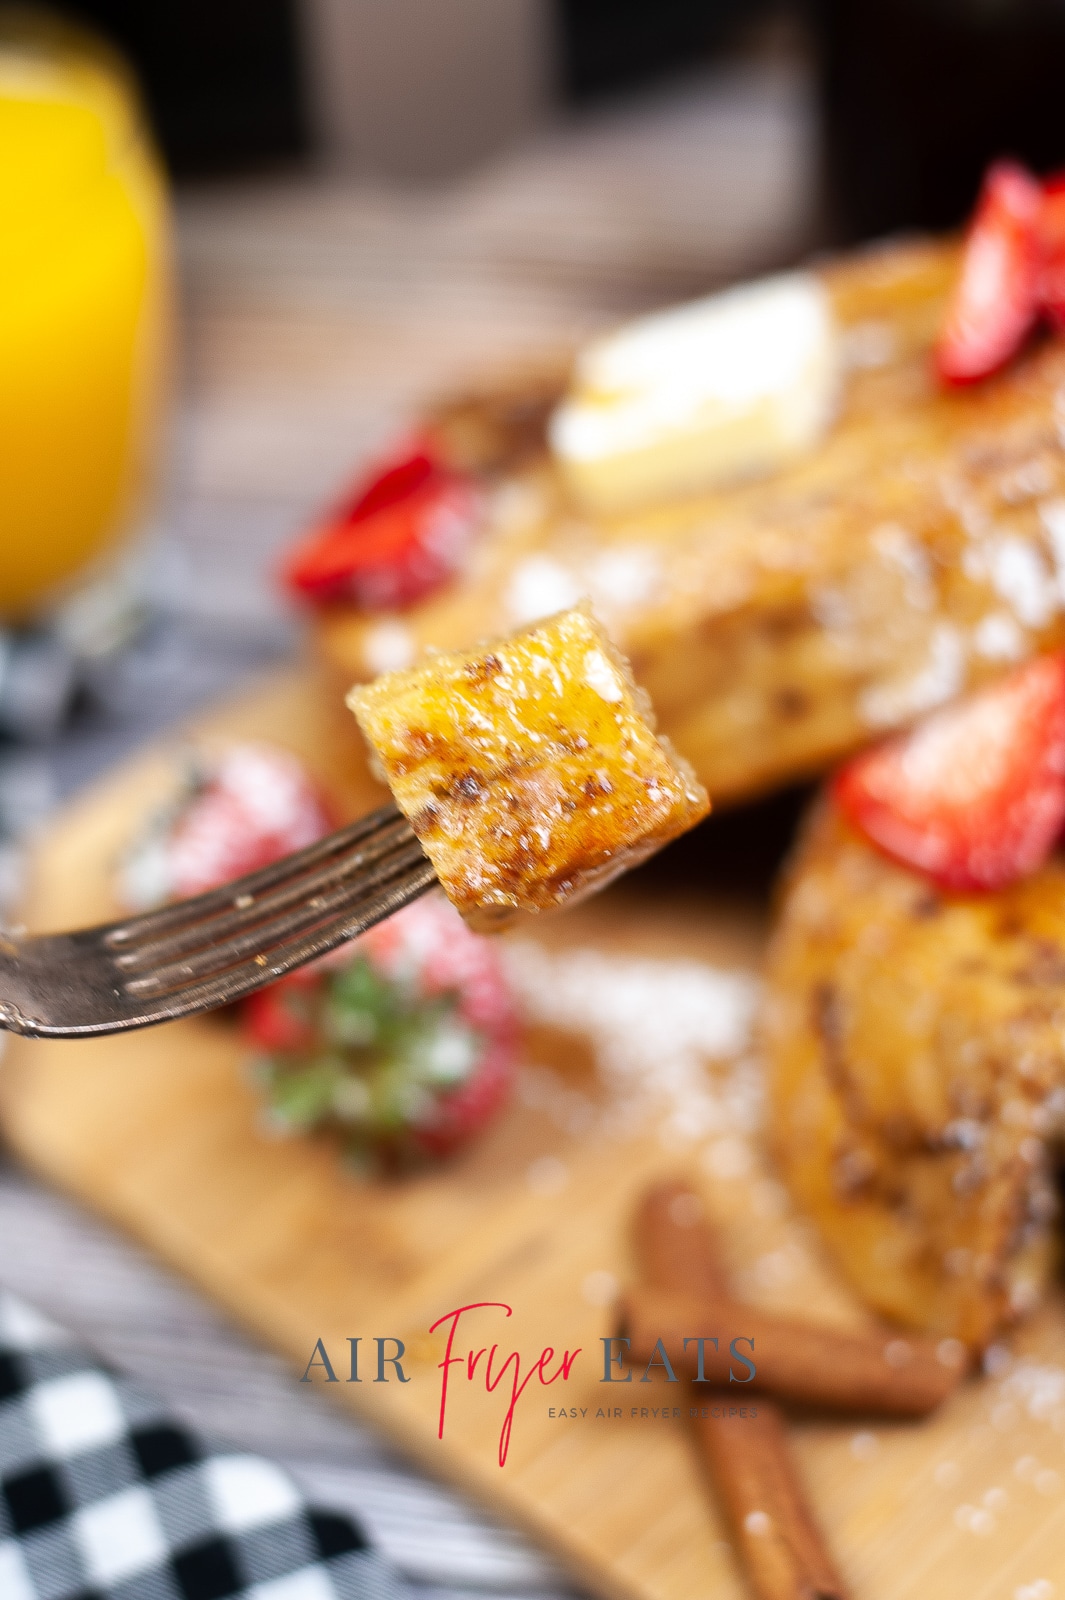 A fork with a bite of air fryer french toast being lifted up. In the background is a board with french toast with strawberries